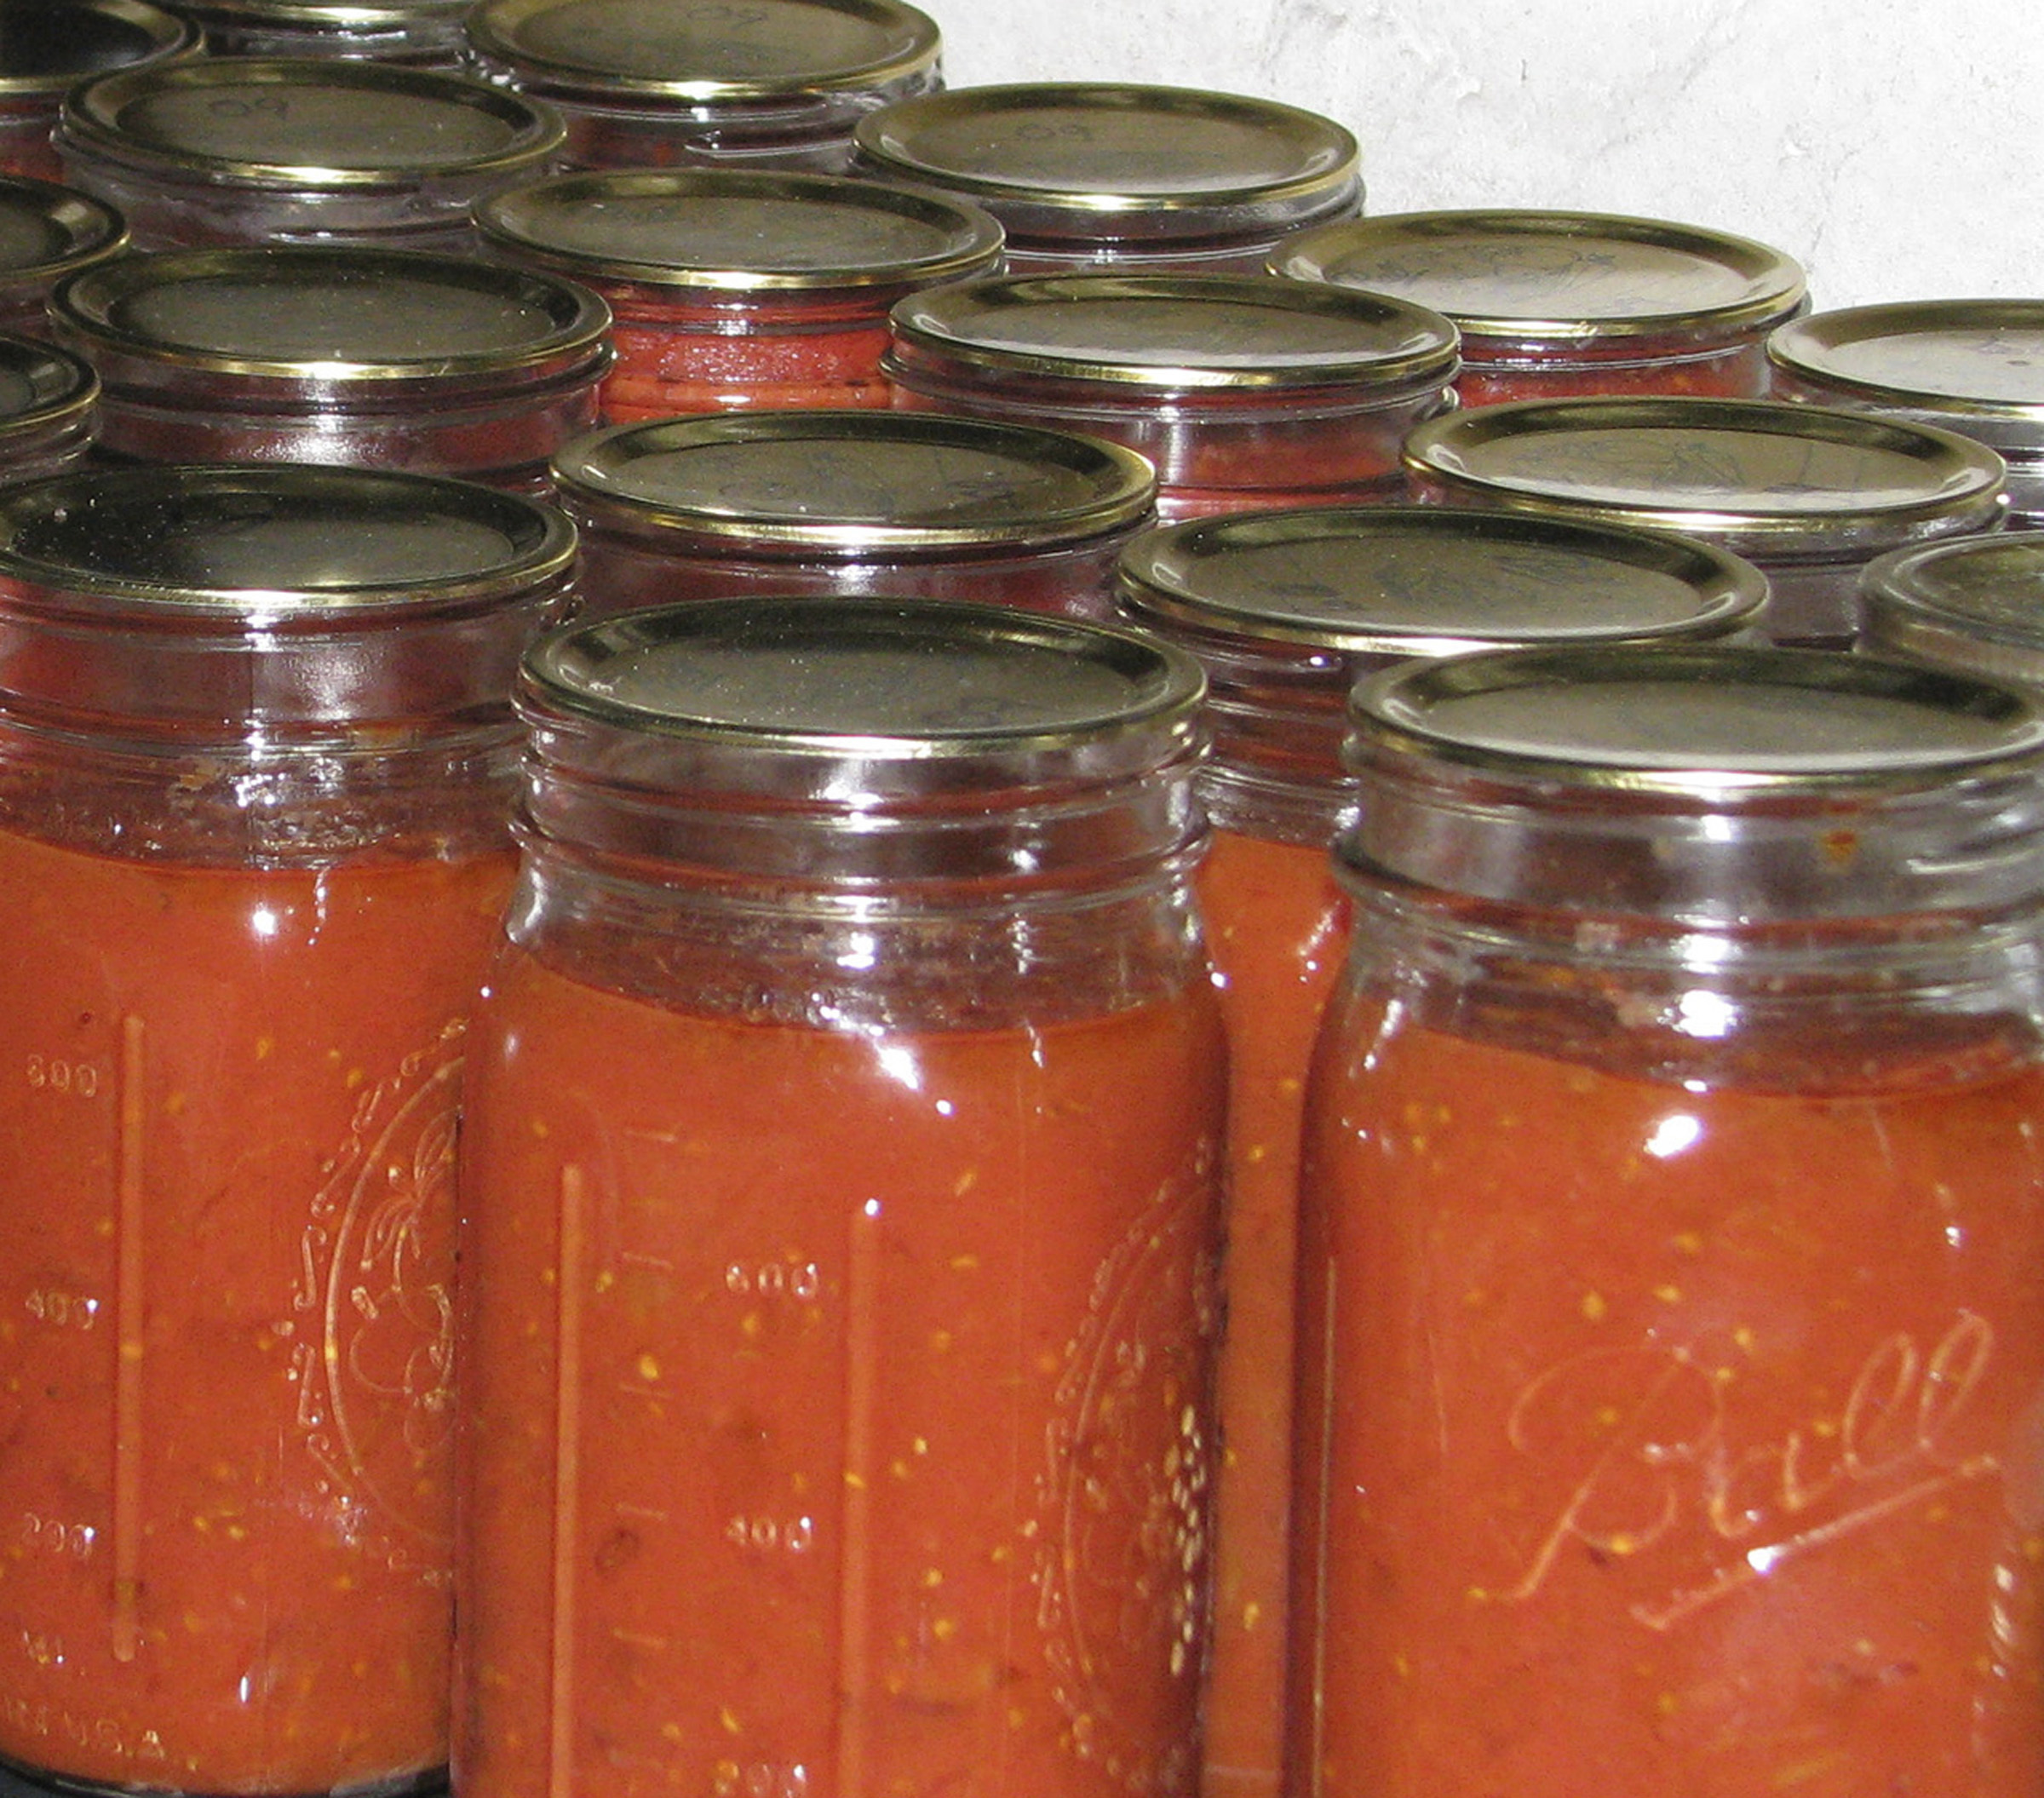 Capture summer’s flavor in a jar by canning tomatoes | The Daily ...